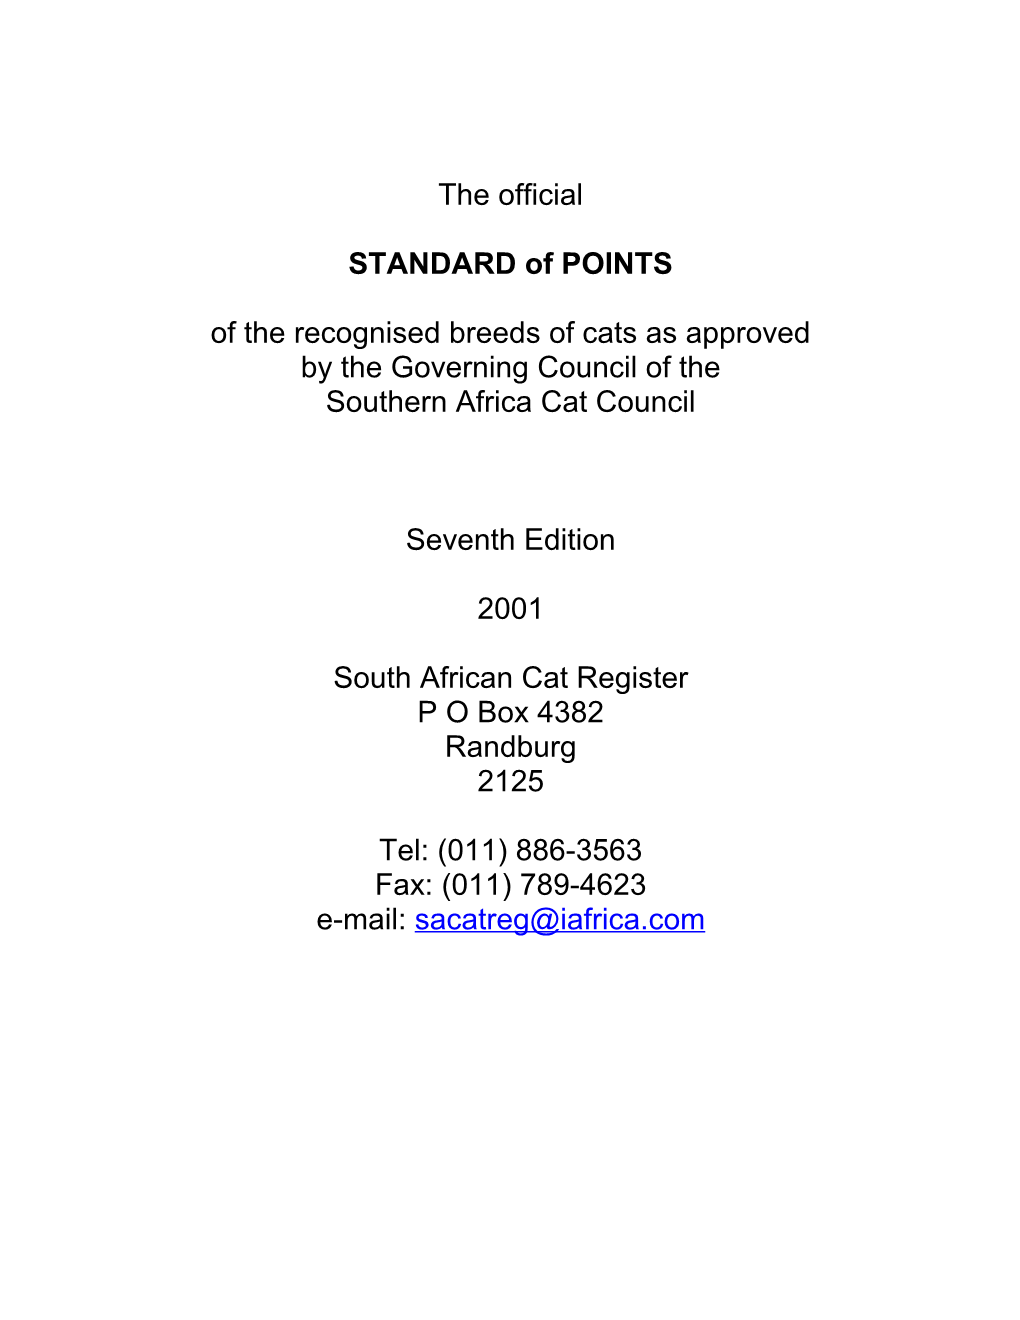 STANDARD of POINTS